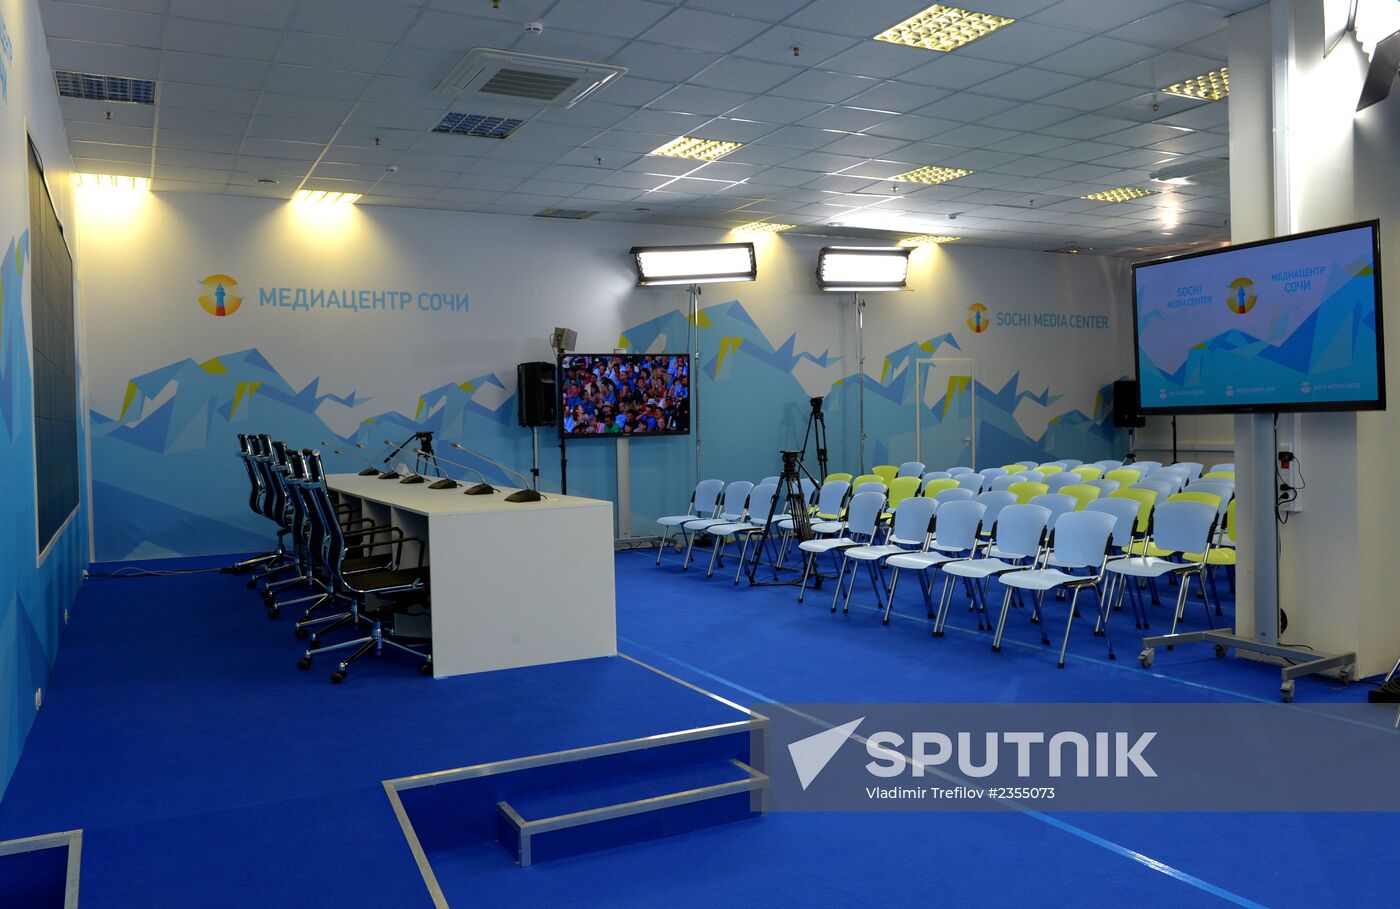 Media Center for Non-Accredited Journalists in Sochi